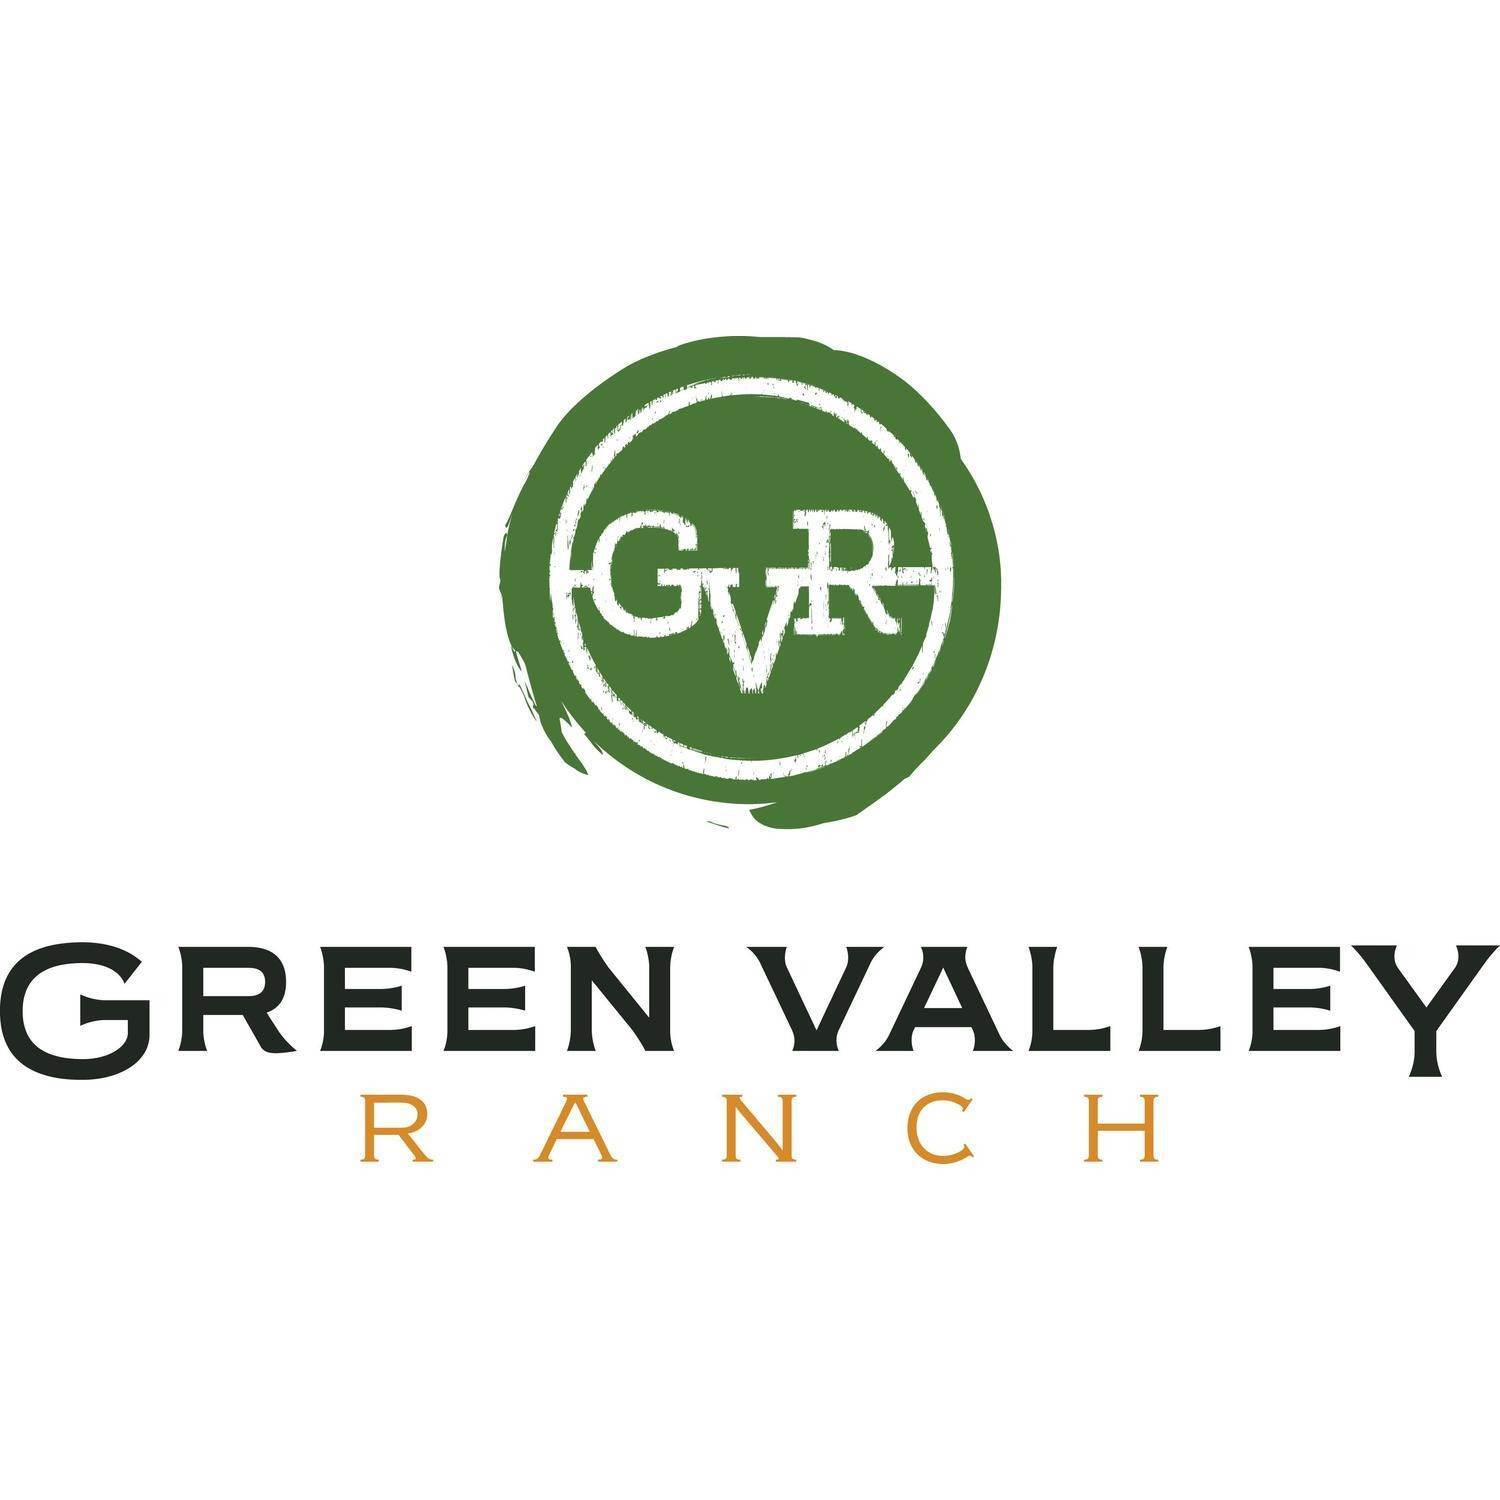 Green Valley Ranch building at 21880 E. 46th Place, Aurora, CO 80019